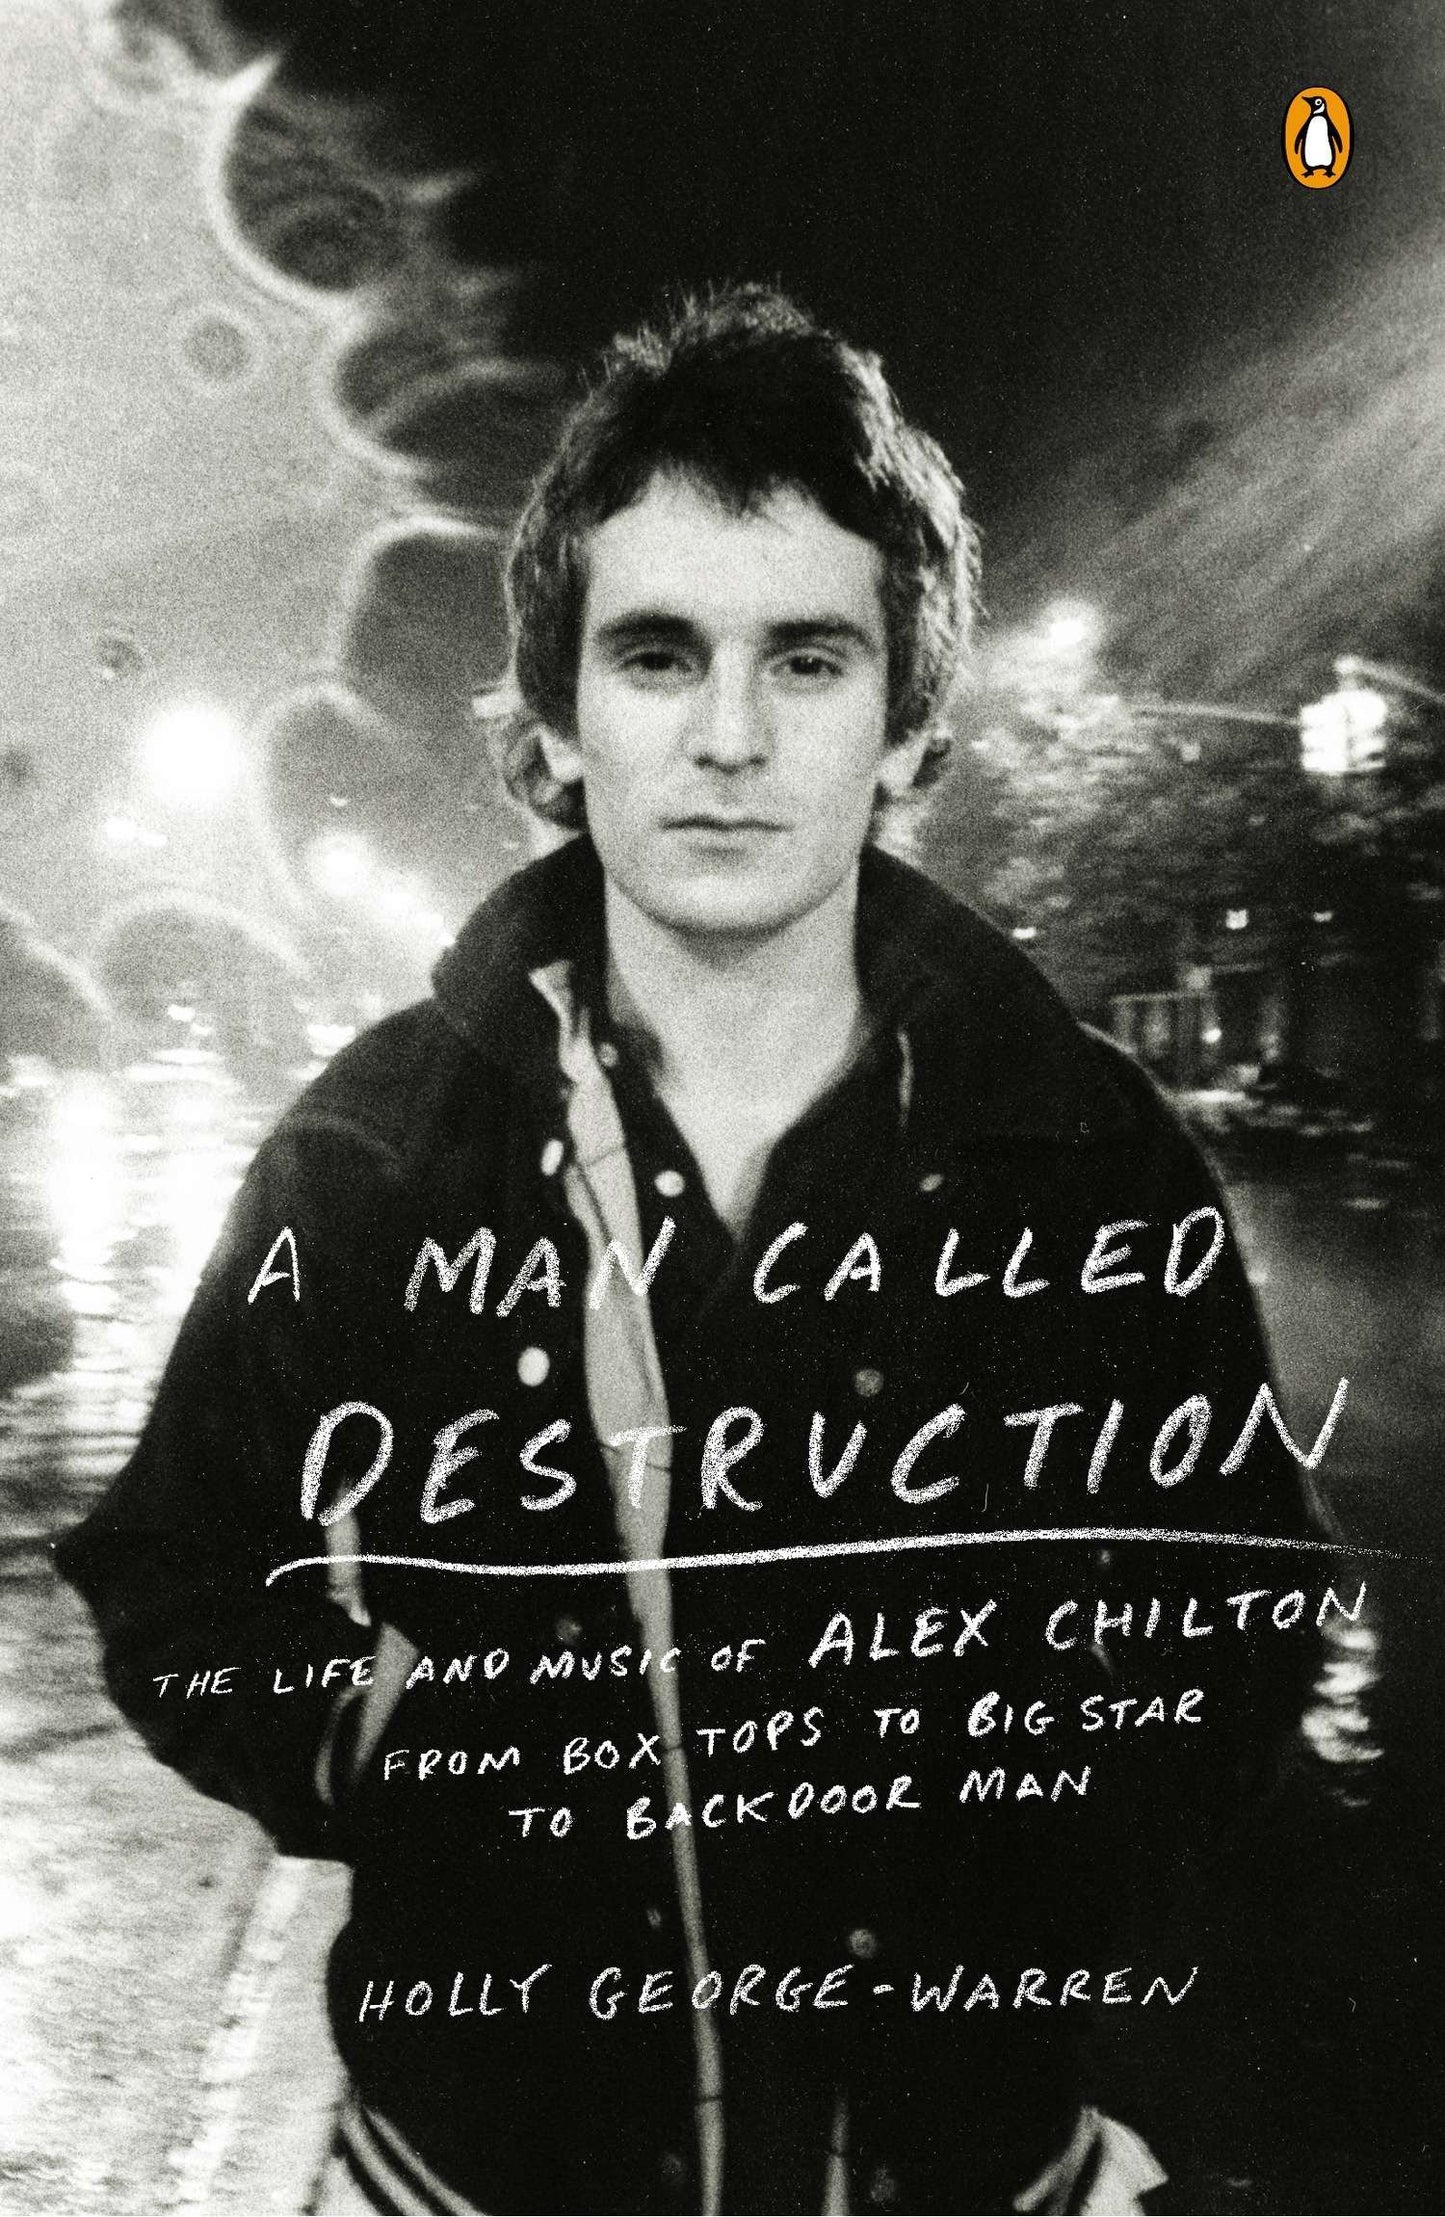 ALEX CHILTON - A MAN CALLED DESTRUCTION: THE LIFE AND MUSIC OF ALEX CHILTON FROM BOX TOPS TO BIG STAR TO BACKDOOR MAN - PAPERBACK - BOOK